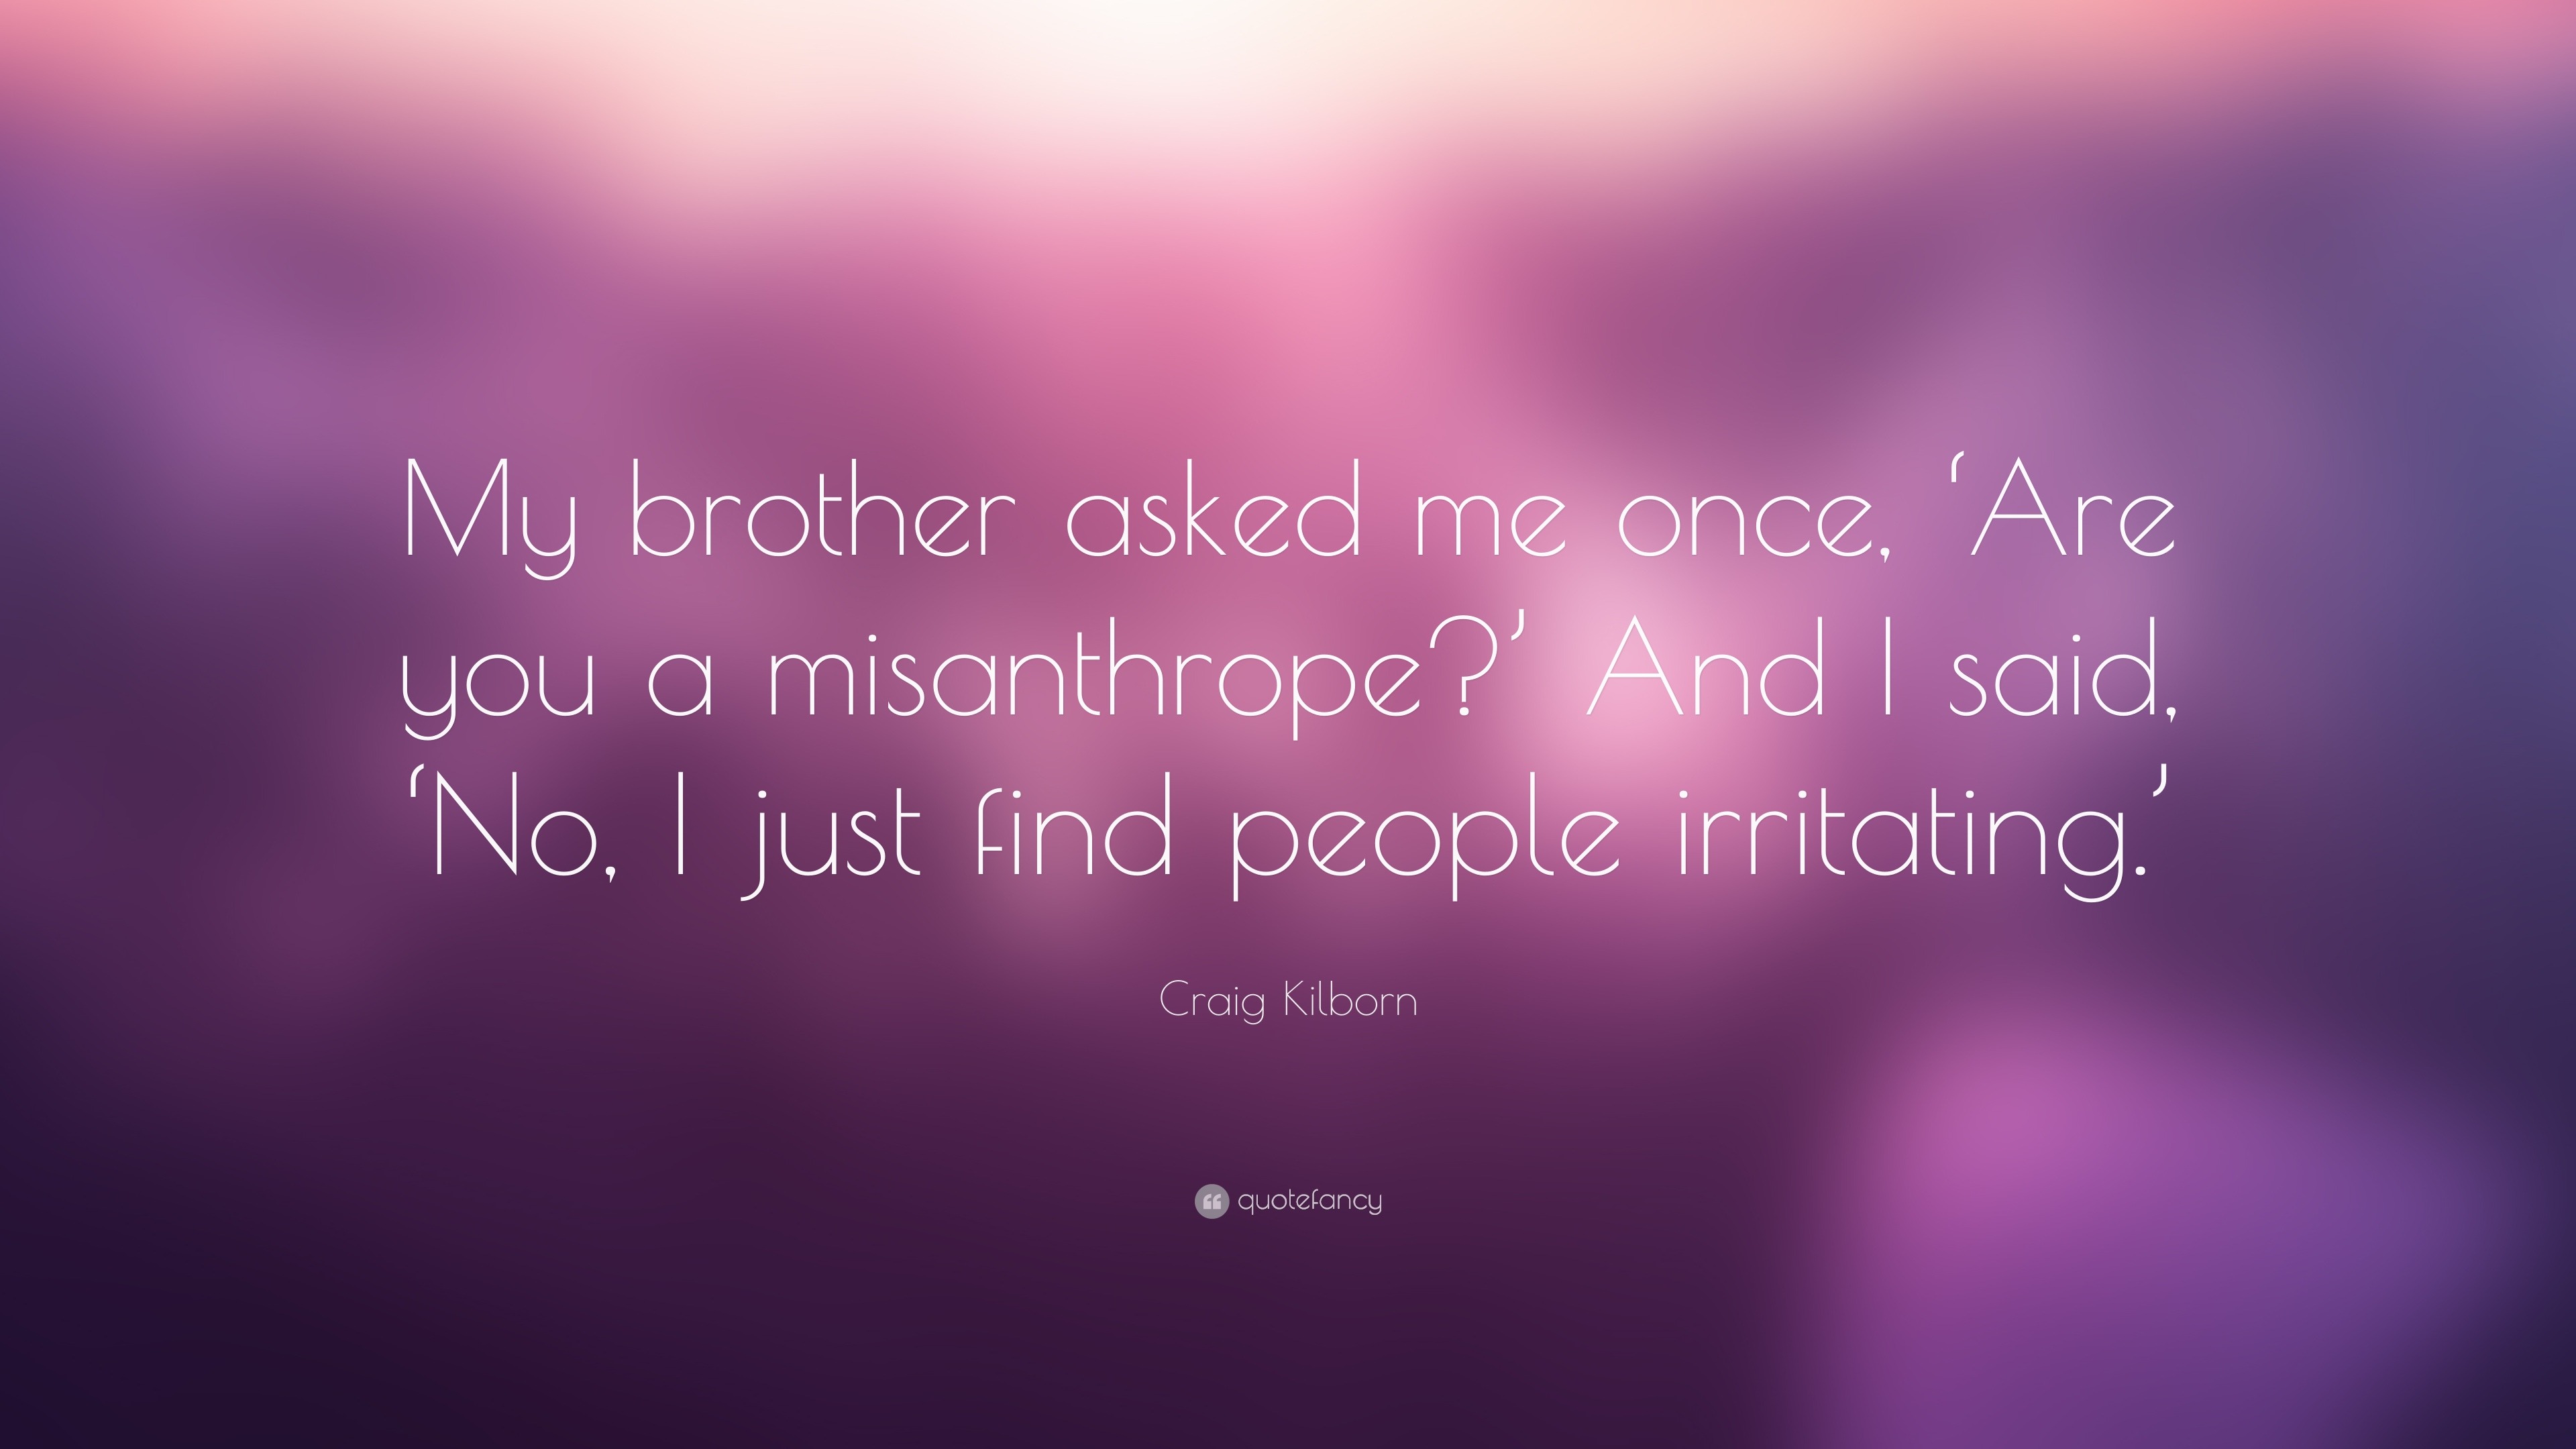 Craig Kilborn Quote: “My brother asked me once, ‘Are you a misanthrope ...